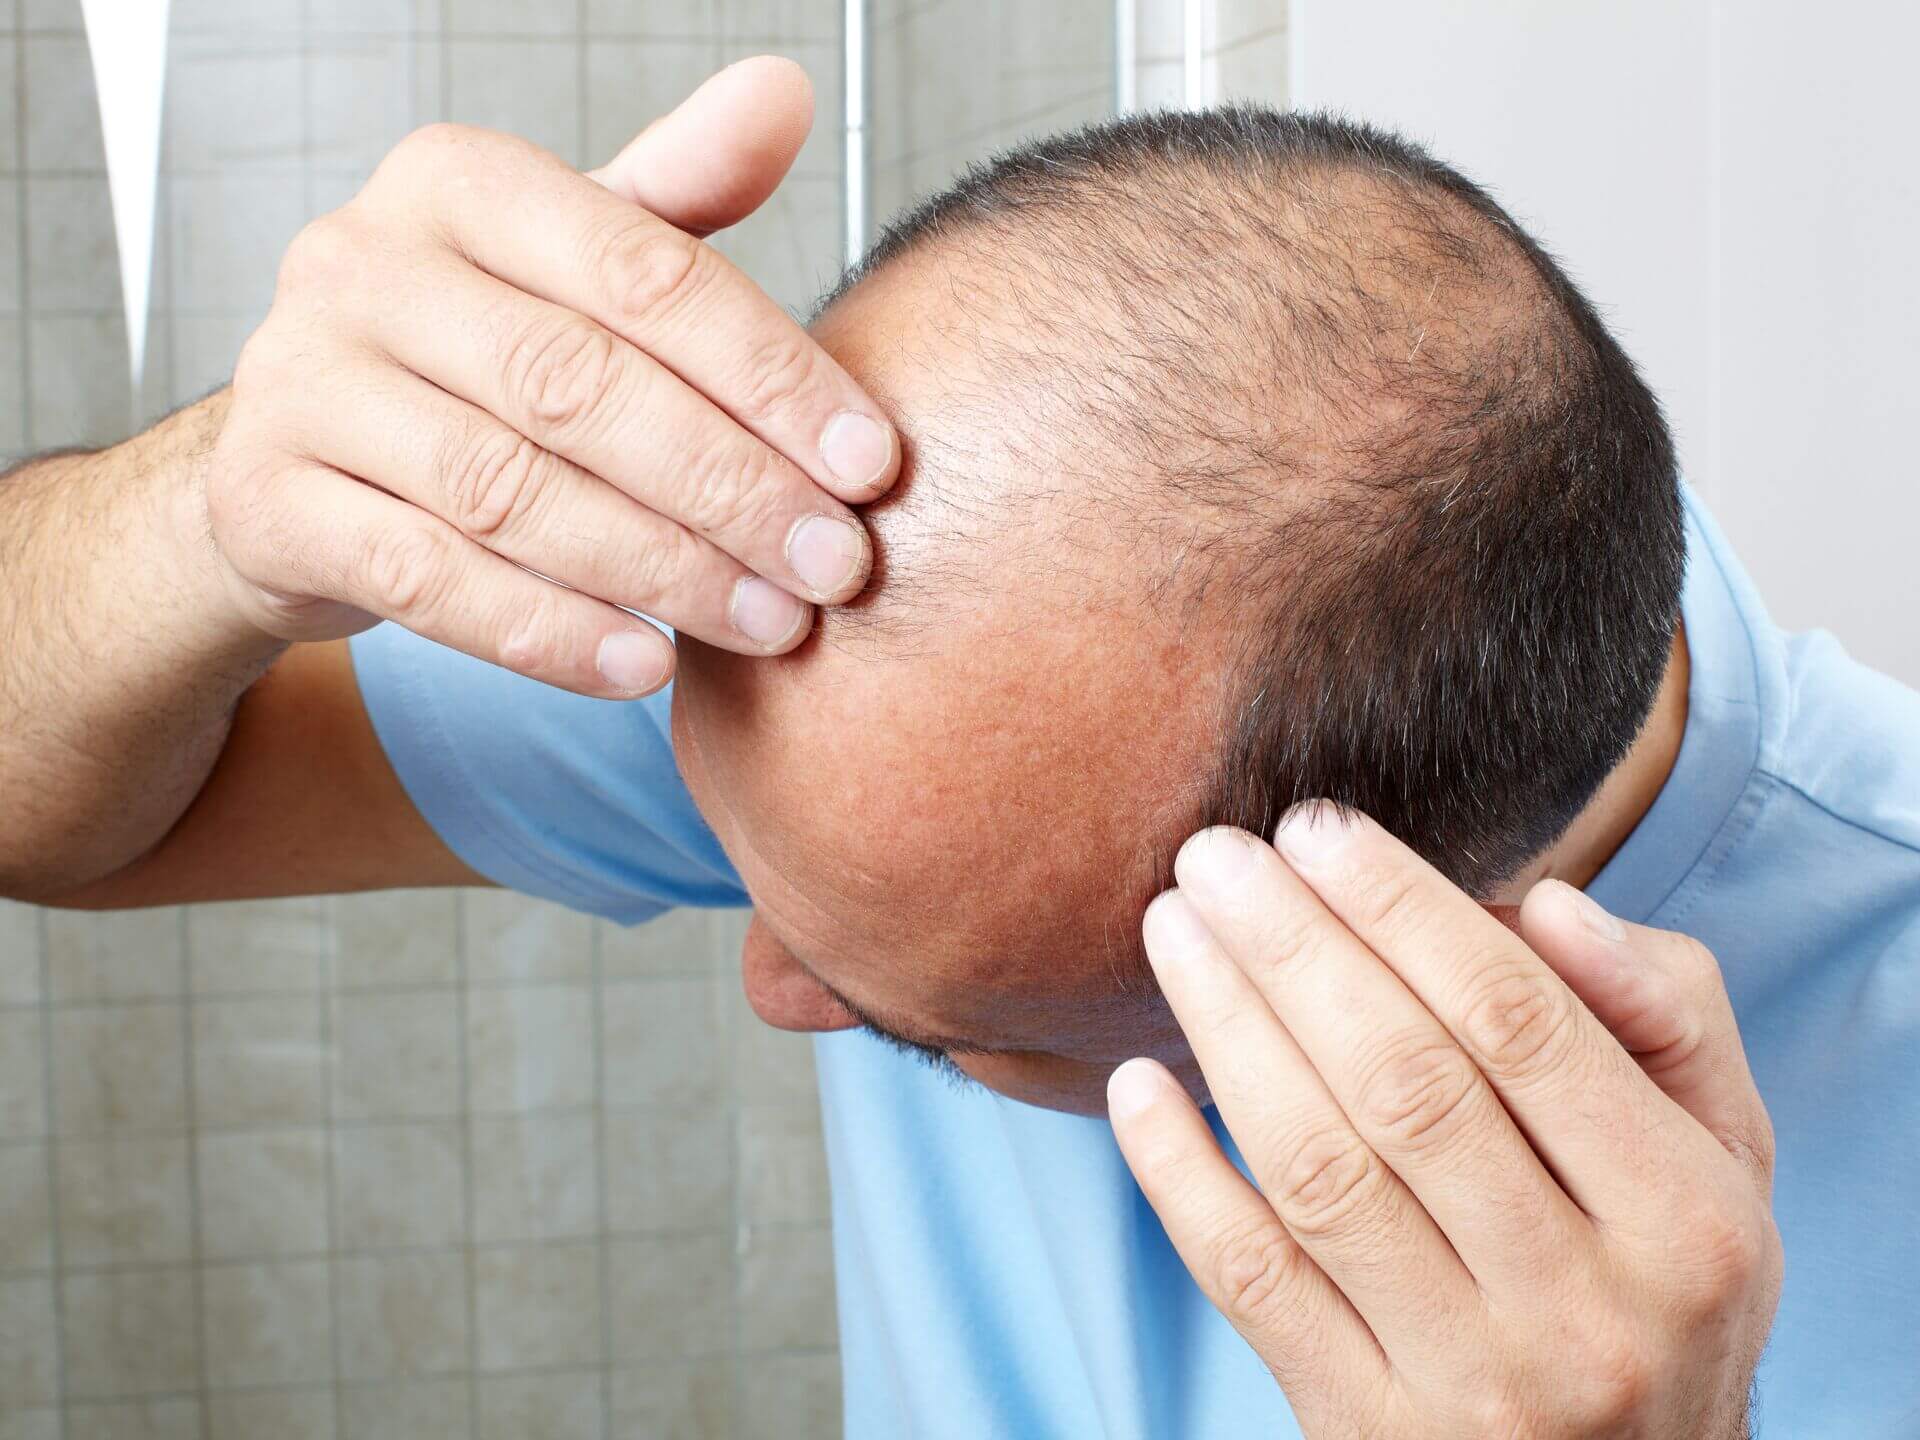 Why sex should be avoided after hair transplantation?